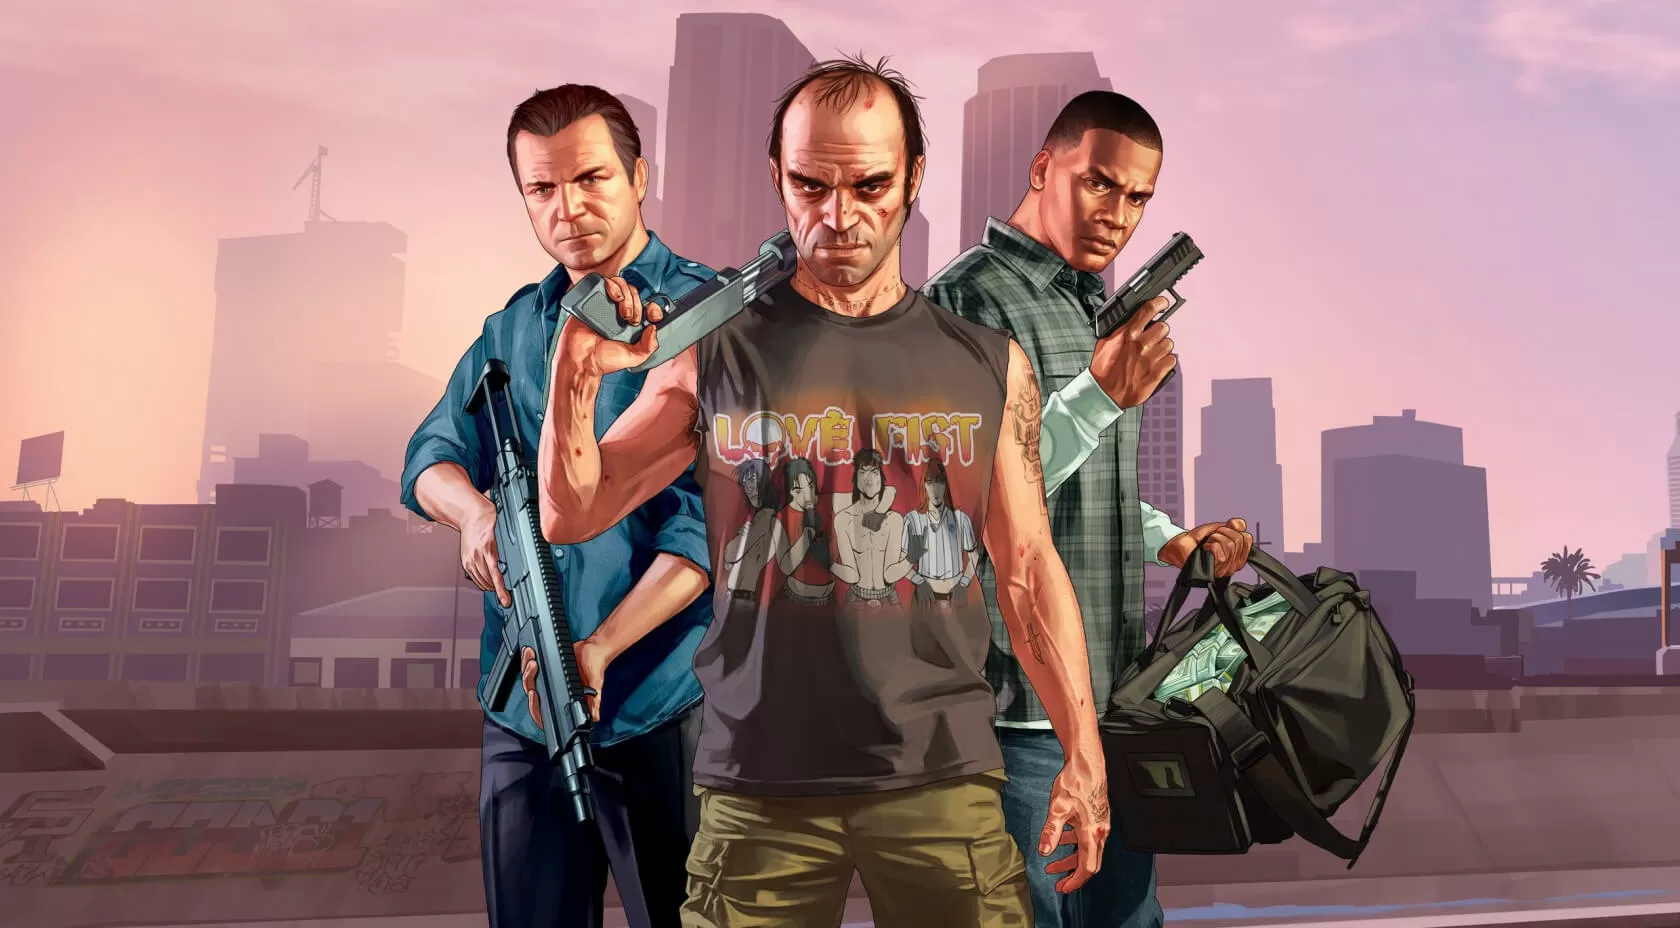 Grand Theft Auto V is now the best-selling game of all time in the US